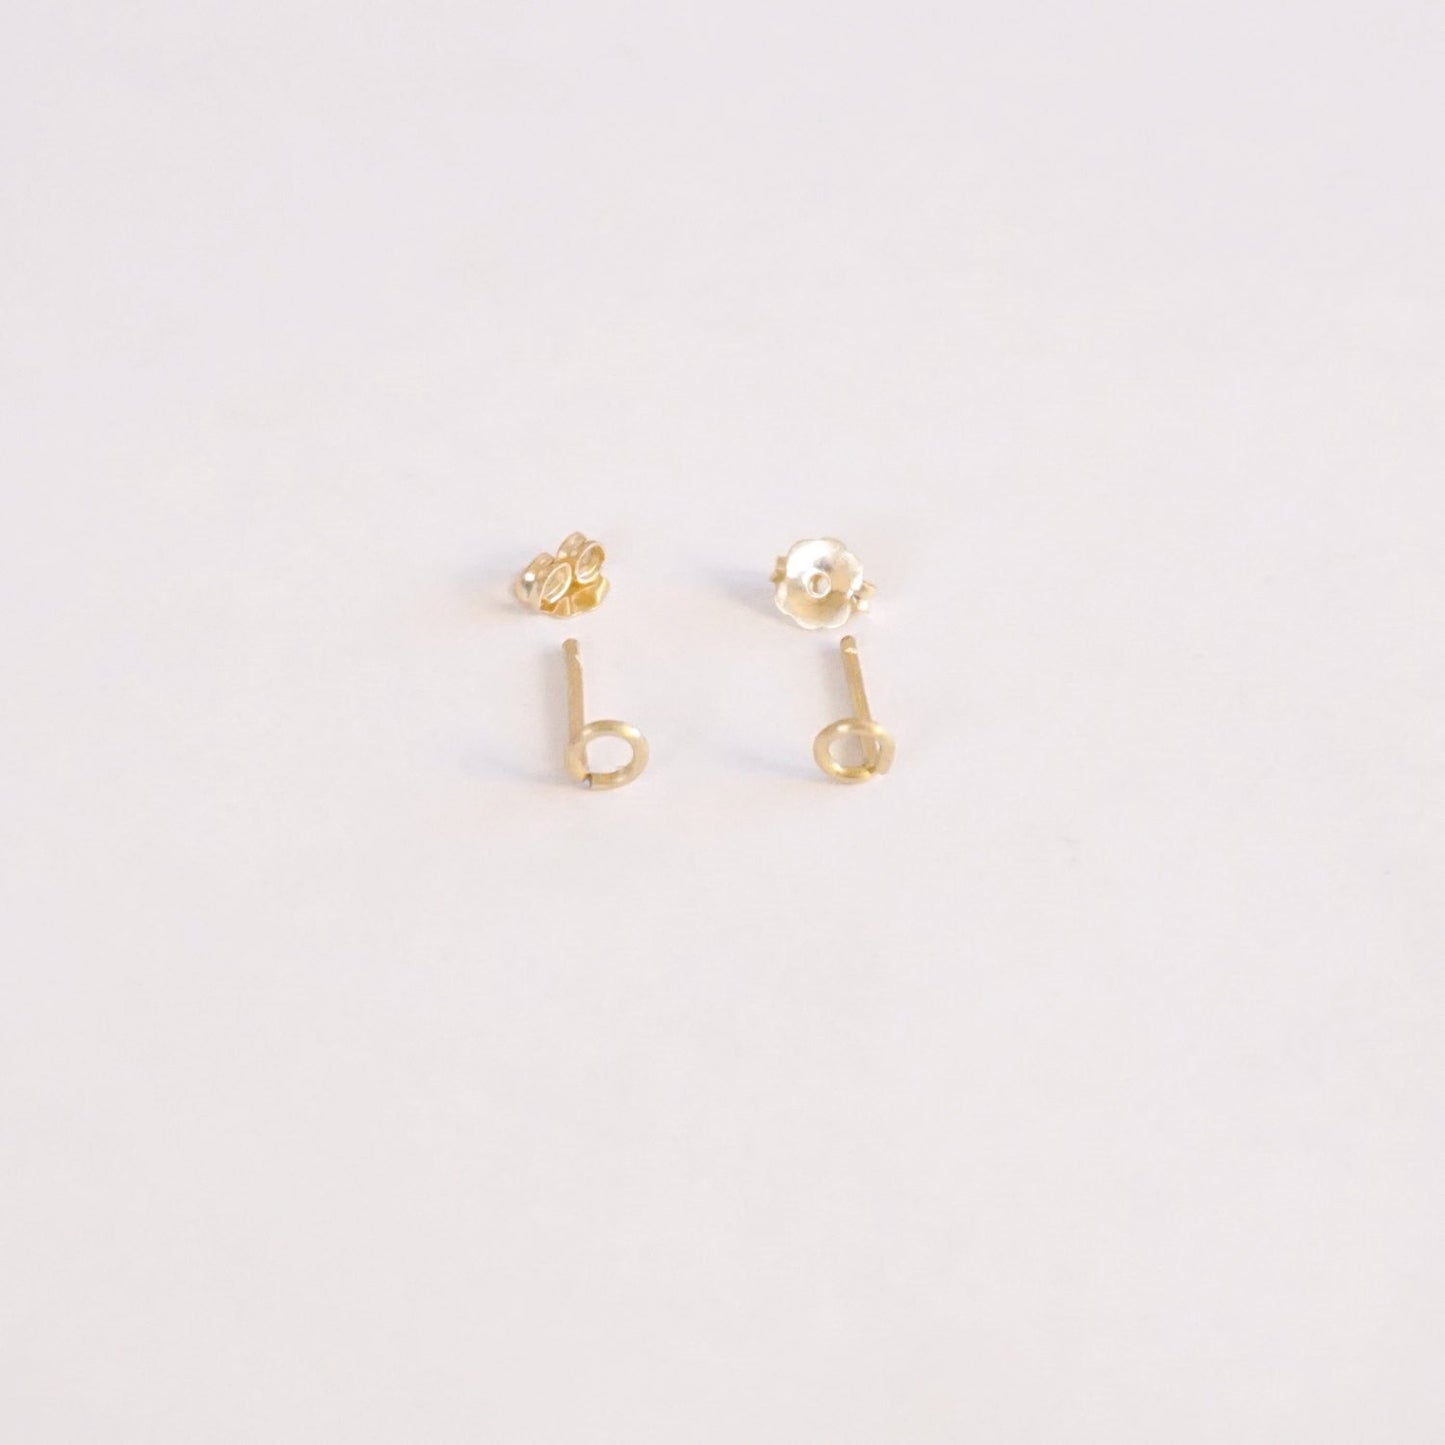 4mm Open Circle Stud Earrings 018 - Patination Design